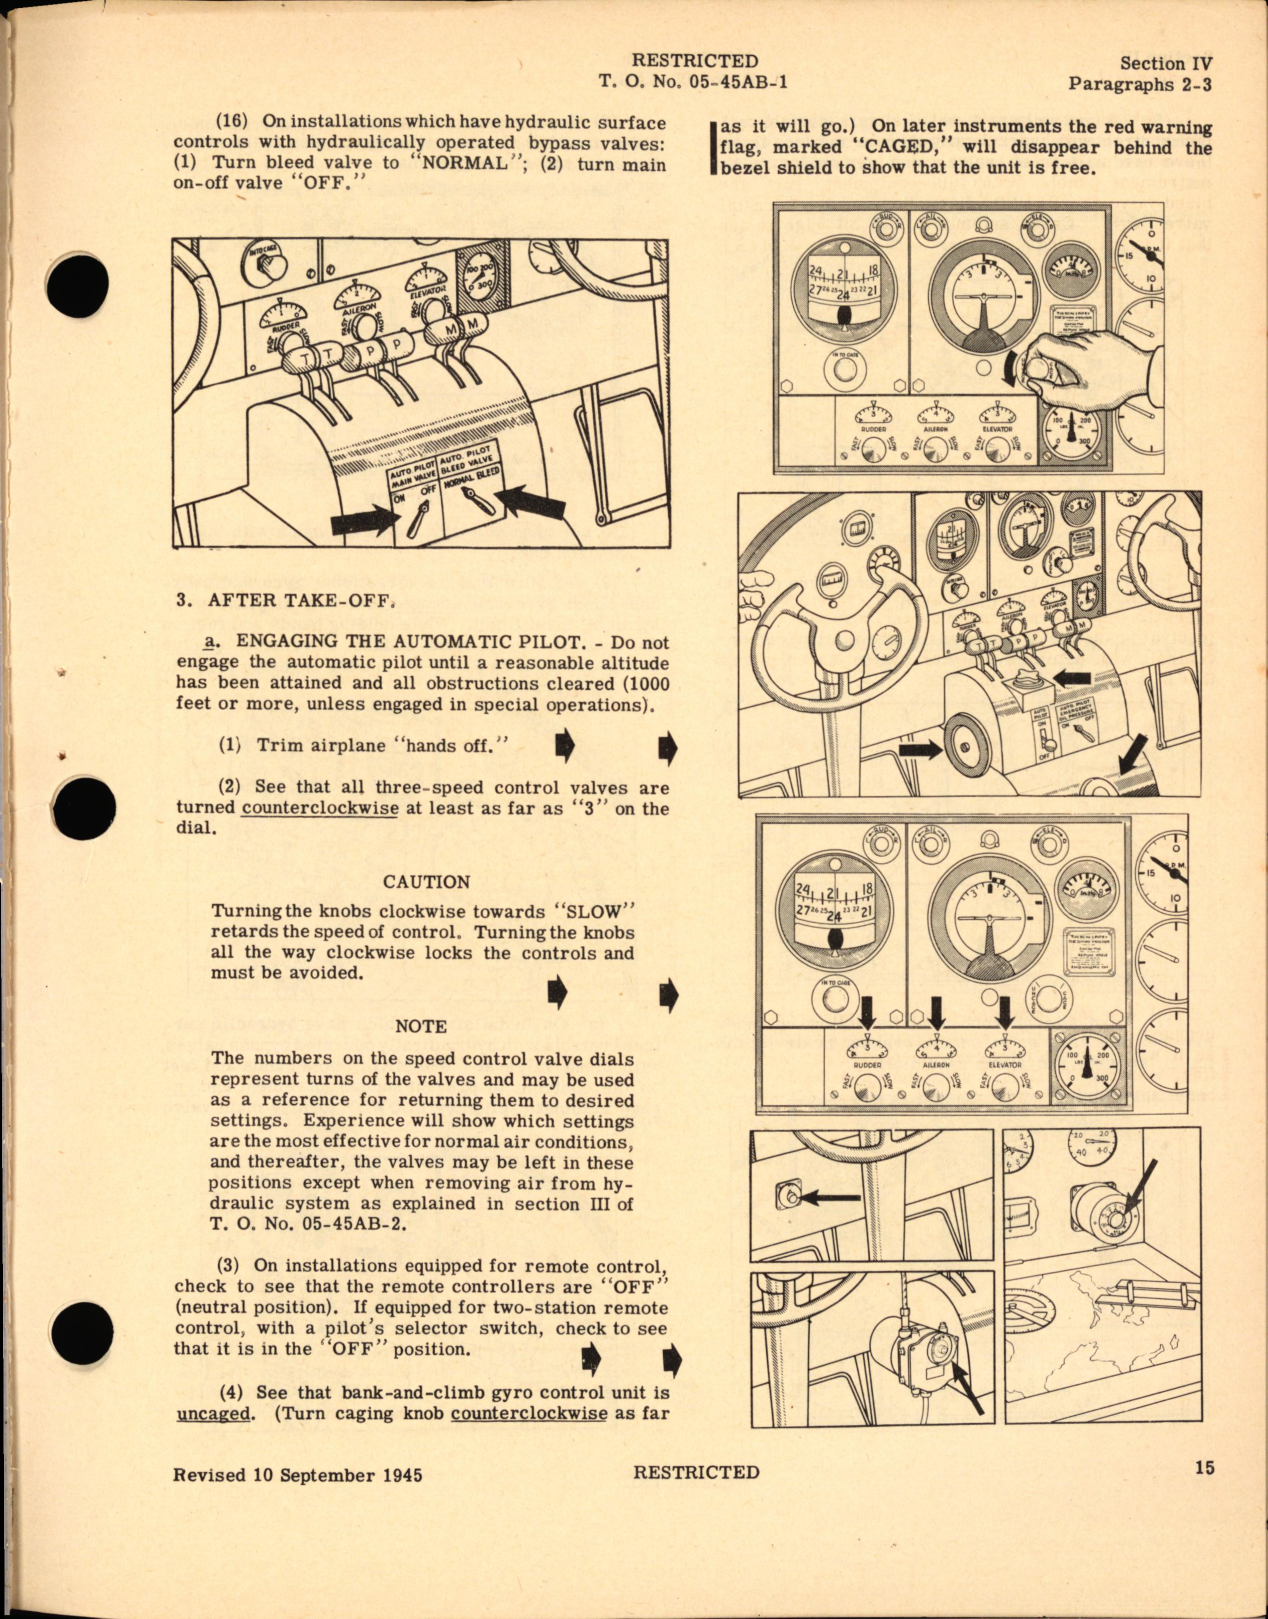 Sample page 13 from AirCorps Library document: Operation & Service Instructions for Automatic Pilot Type A-3